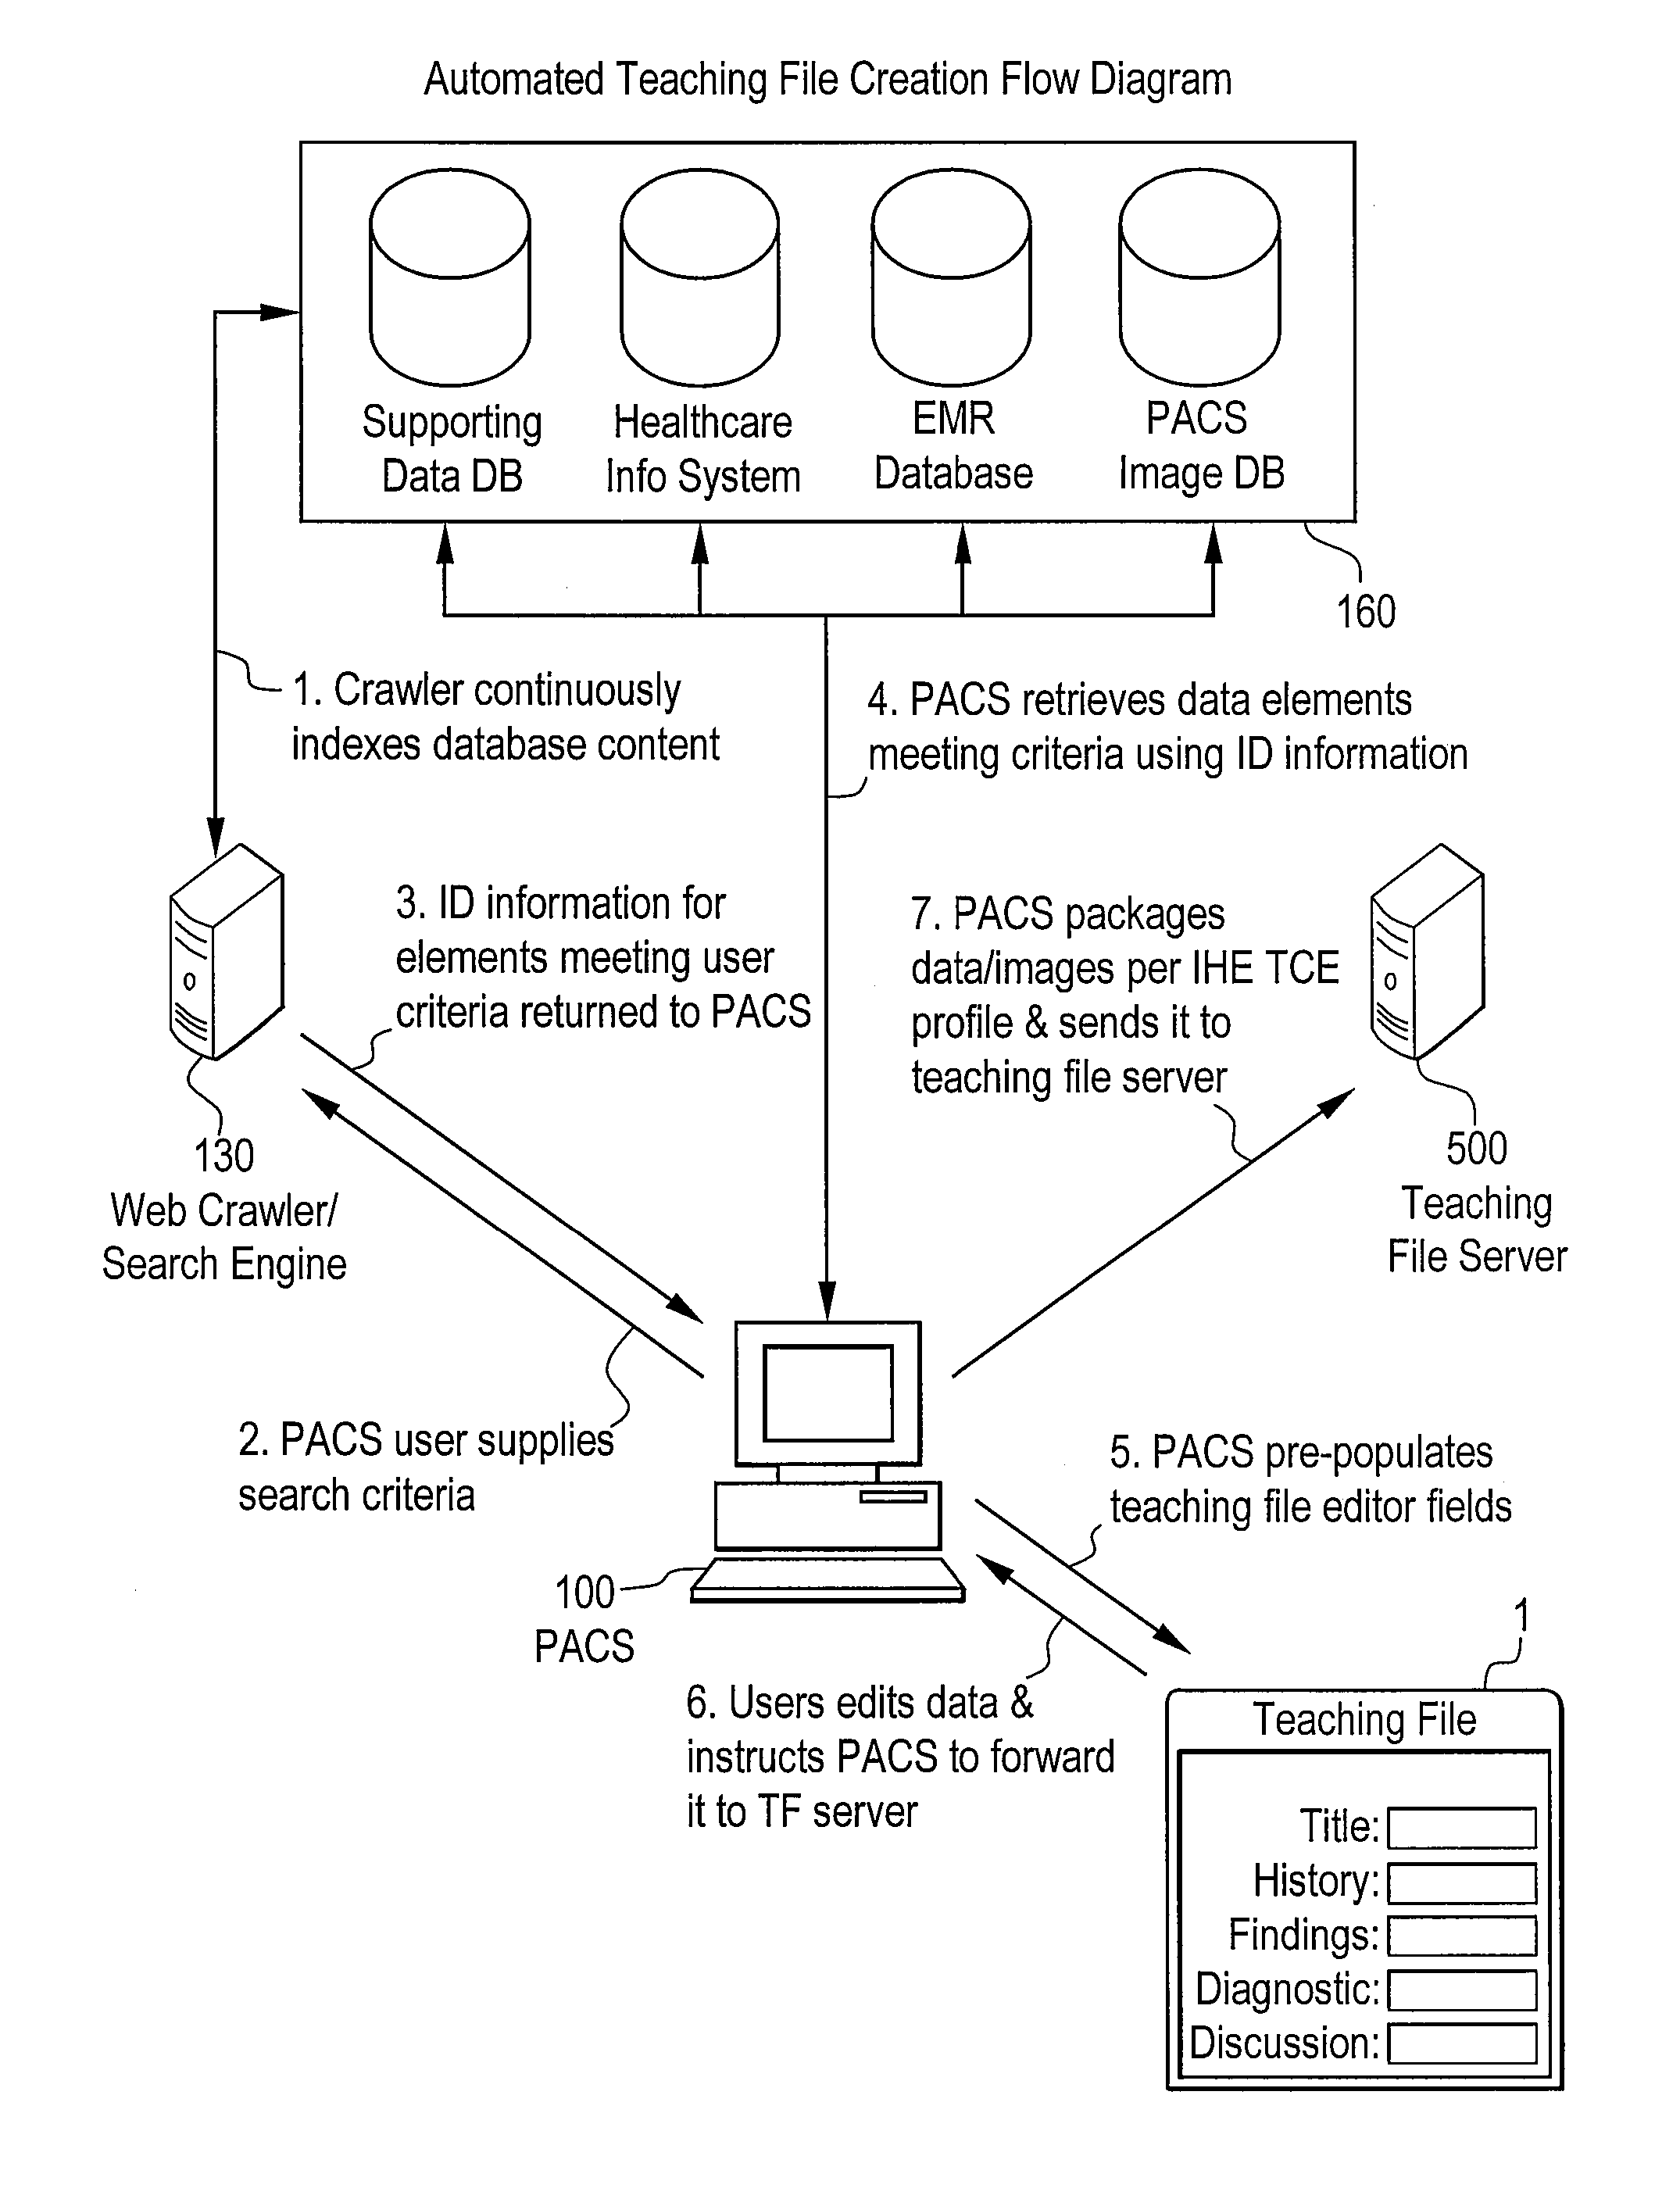 Systems and methods for generating a teaching file message